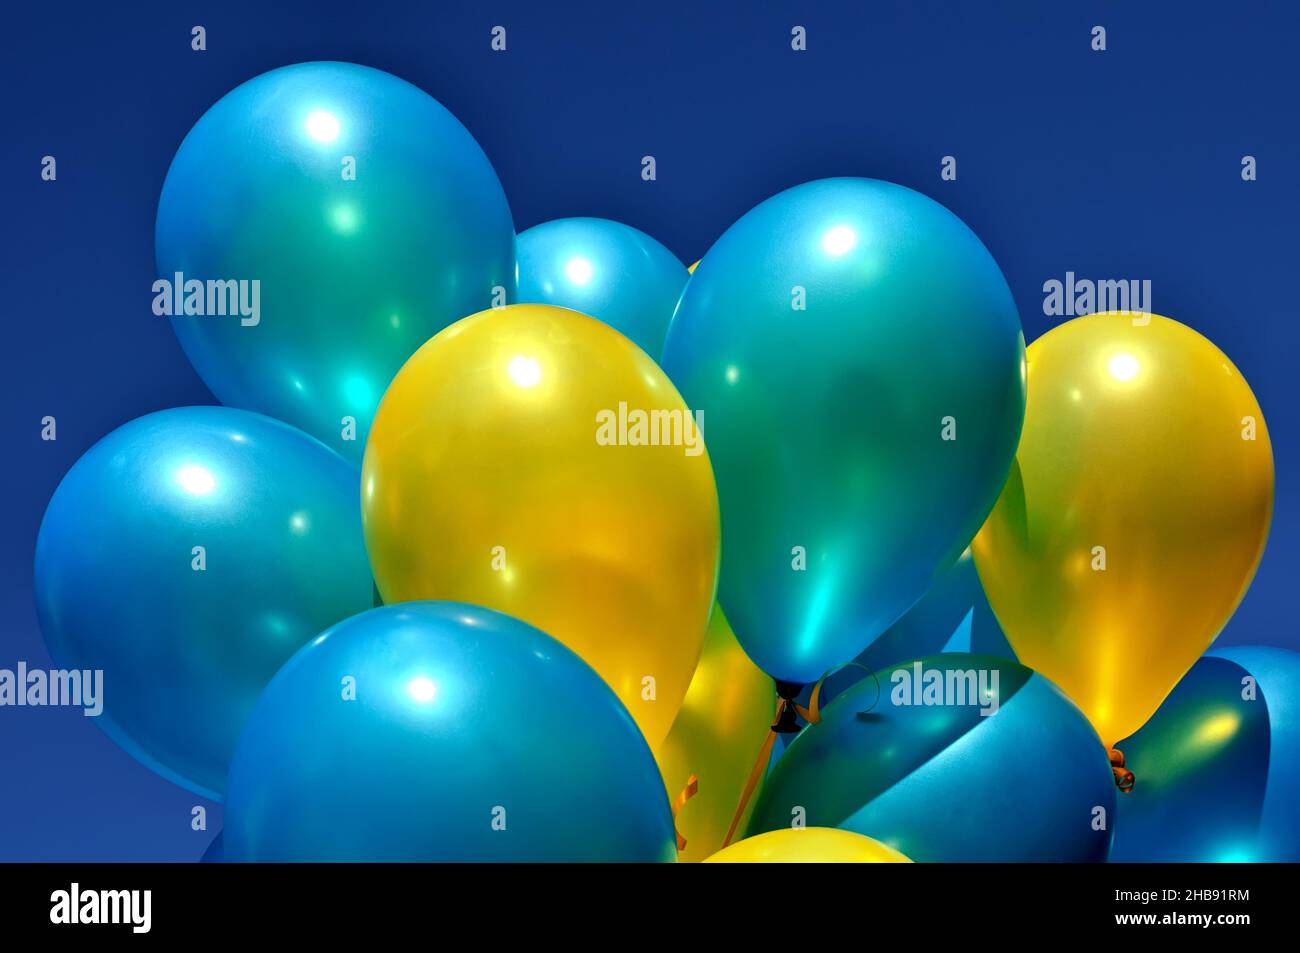 blue and yellow metallic balloons in the city festival against deep blue sky Stock Photo